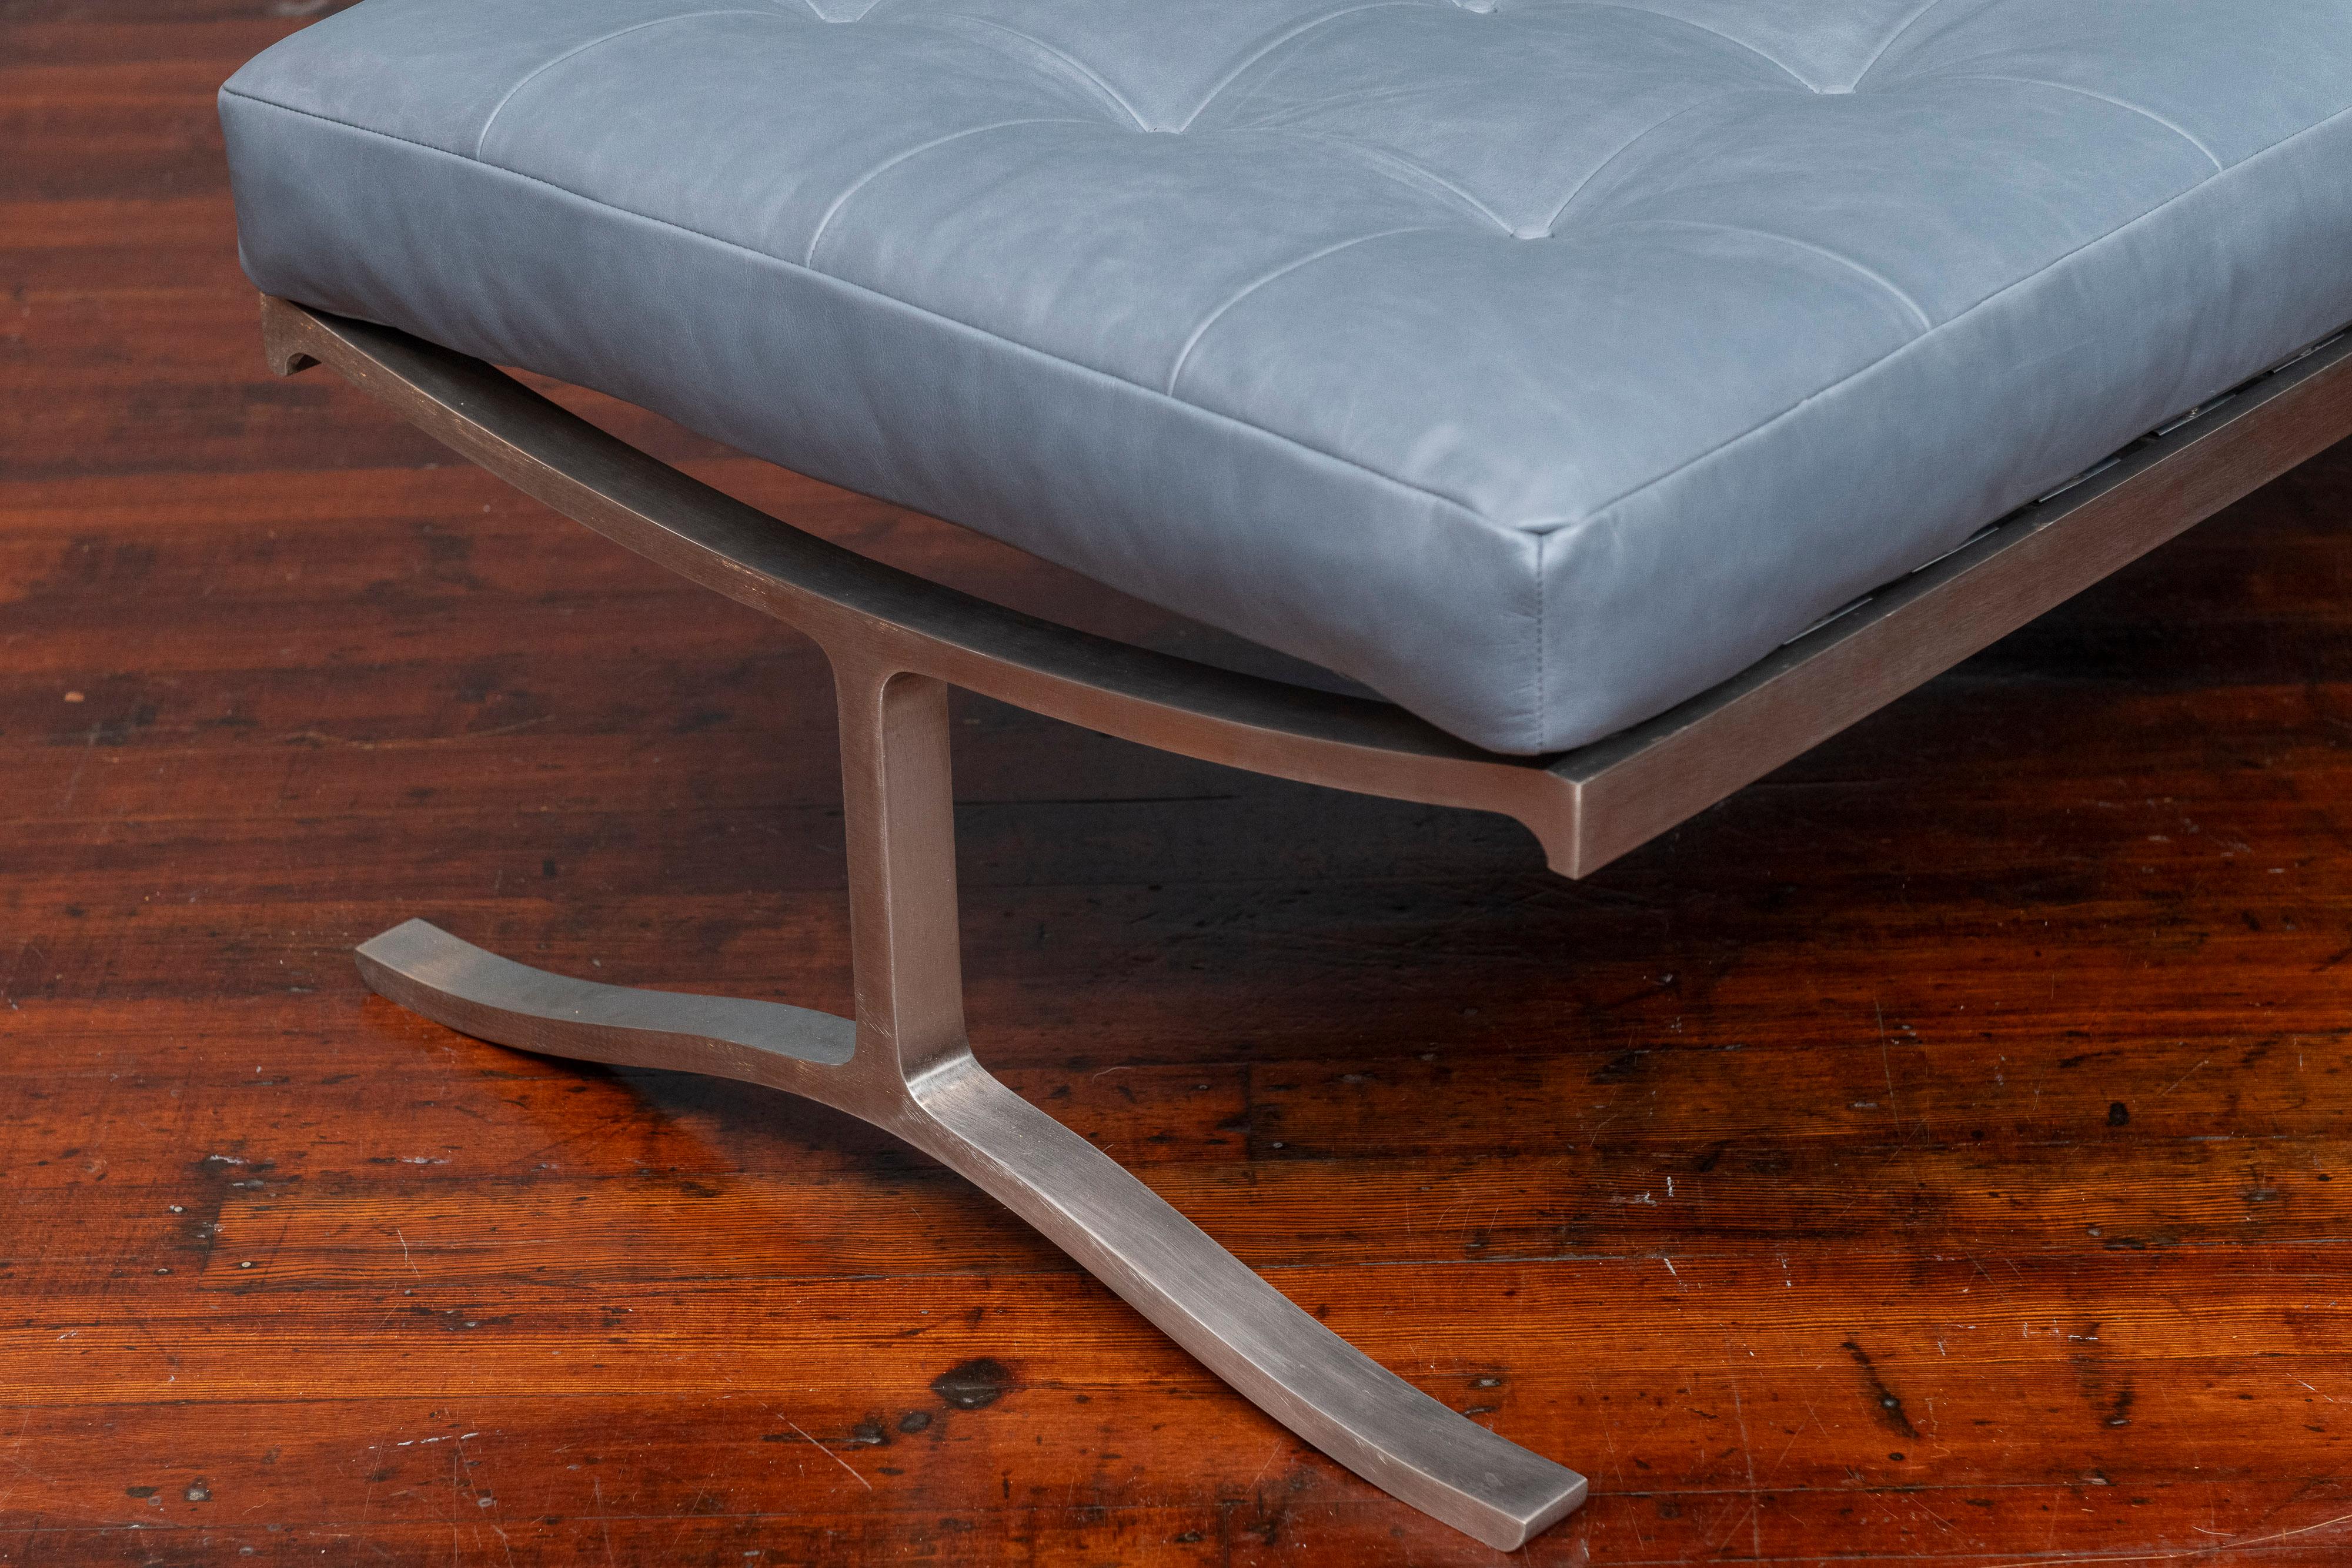 Nicos Zographos design stainless steel and leather upholstered bench. 
Classic modern design lines made with a high quality solid stainless steel frame in very good restored condition. Newly upholstered in high quality Italian ice blue leather in a